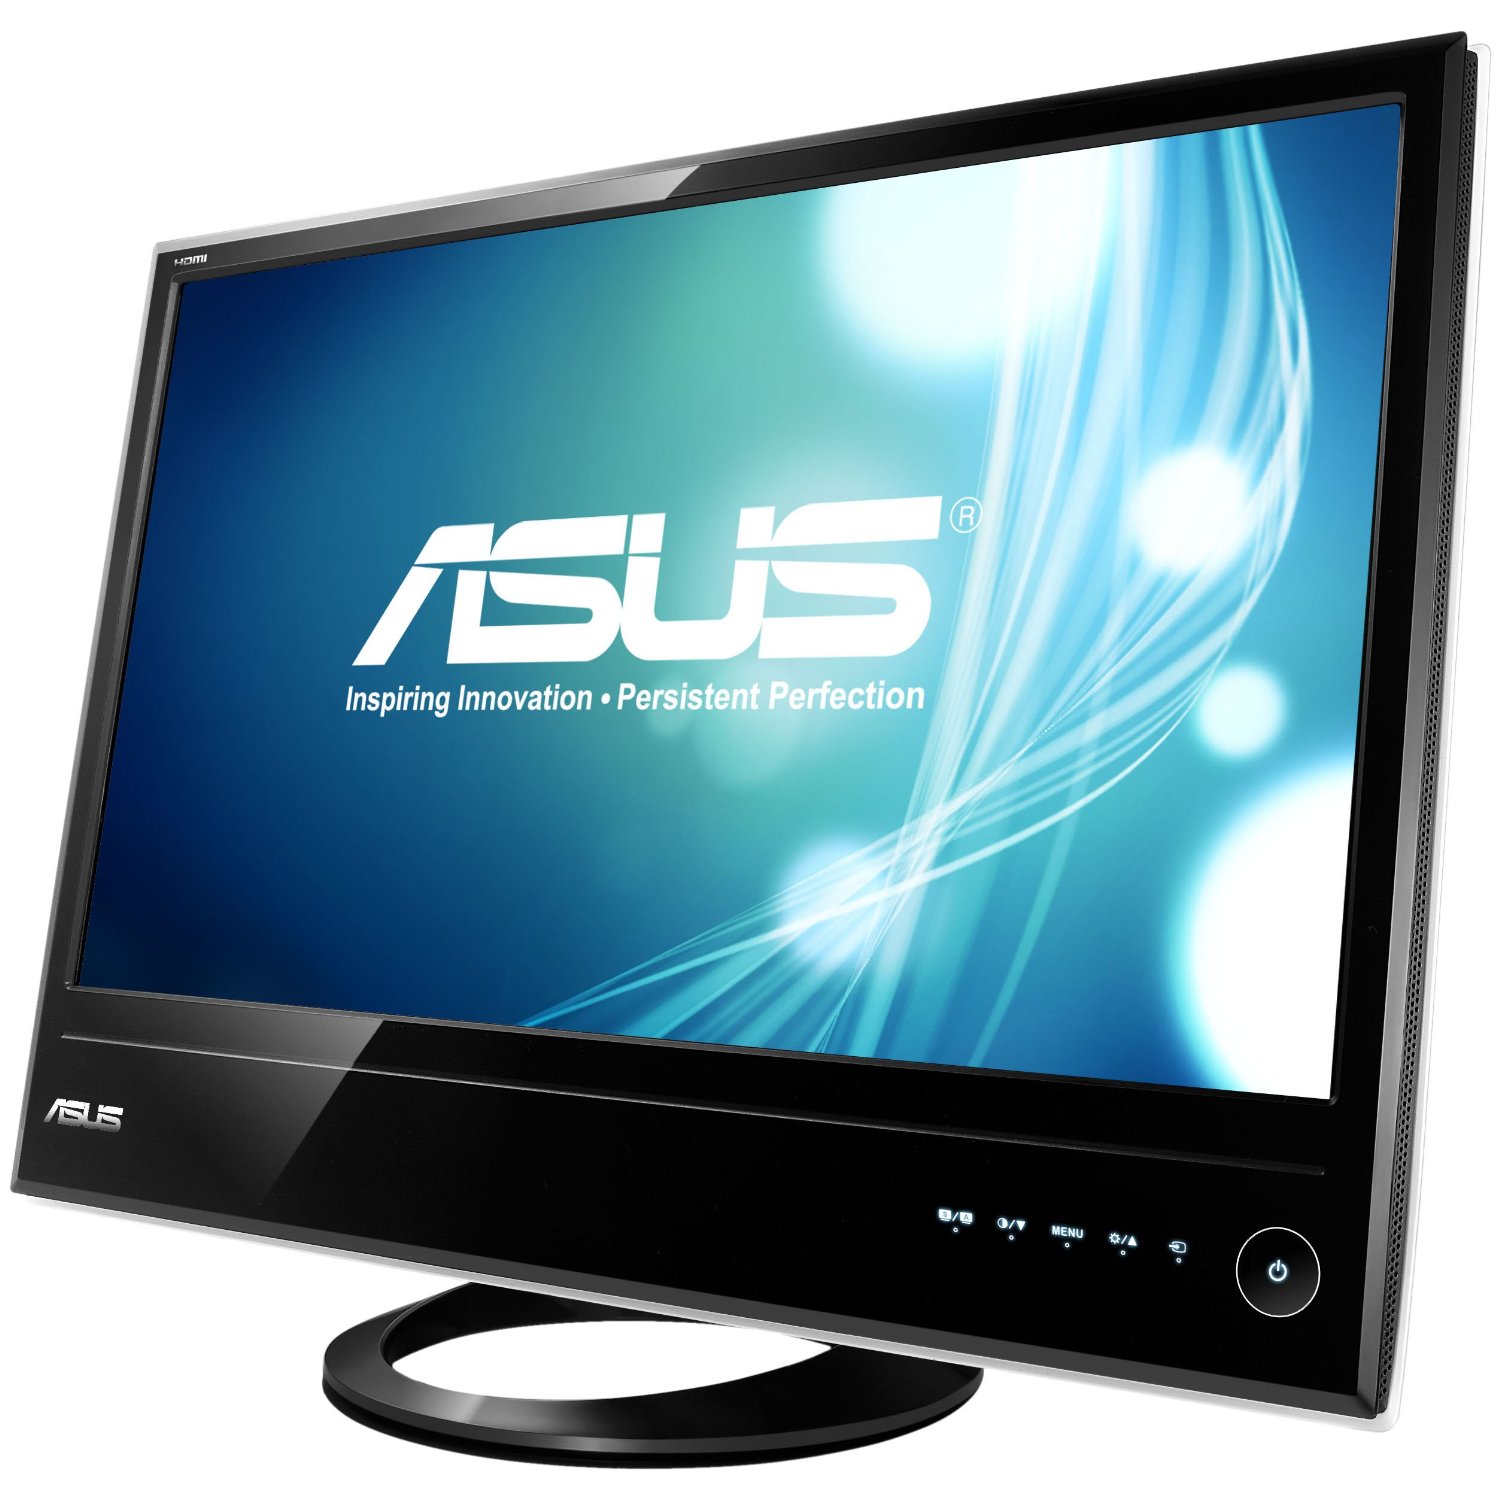 http://thetechjournal.com/wp-content/uploads/images/1109/1315024549-asus-ml228h-22inch-ultraslim-widescreen-led-monitor-1.jpg